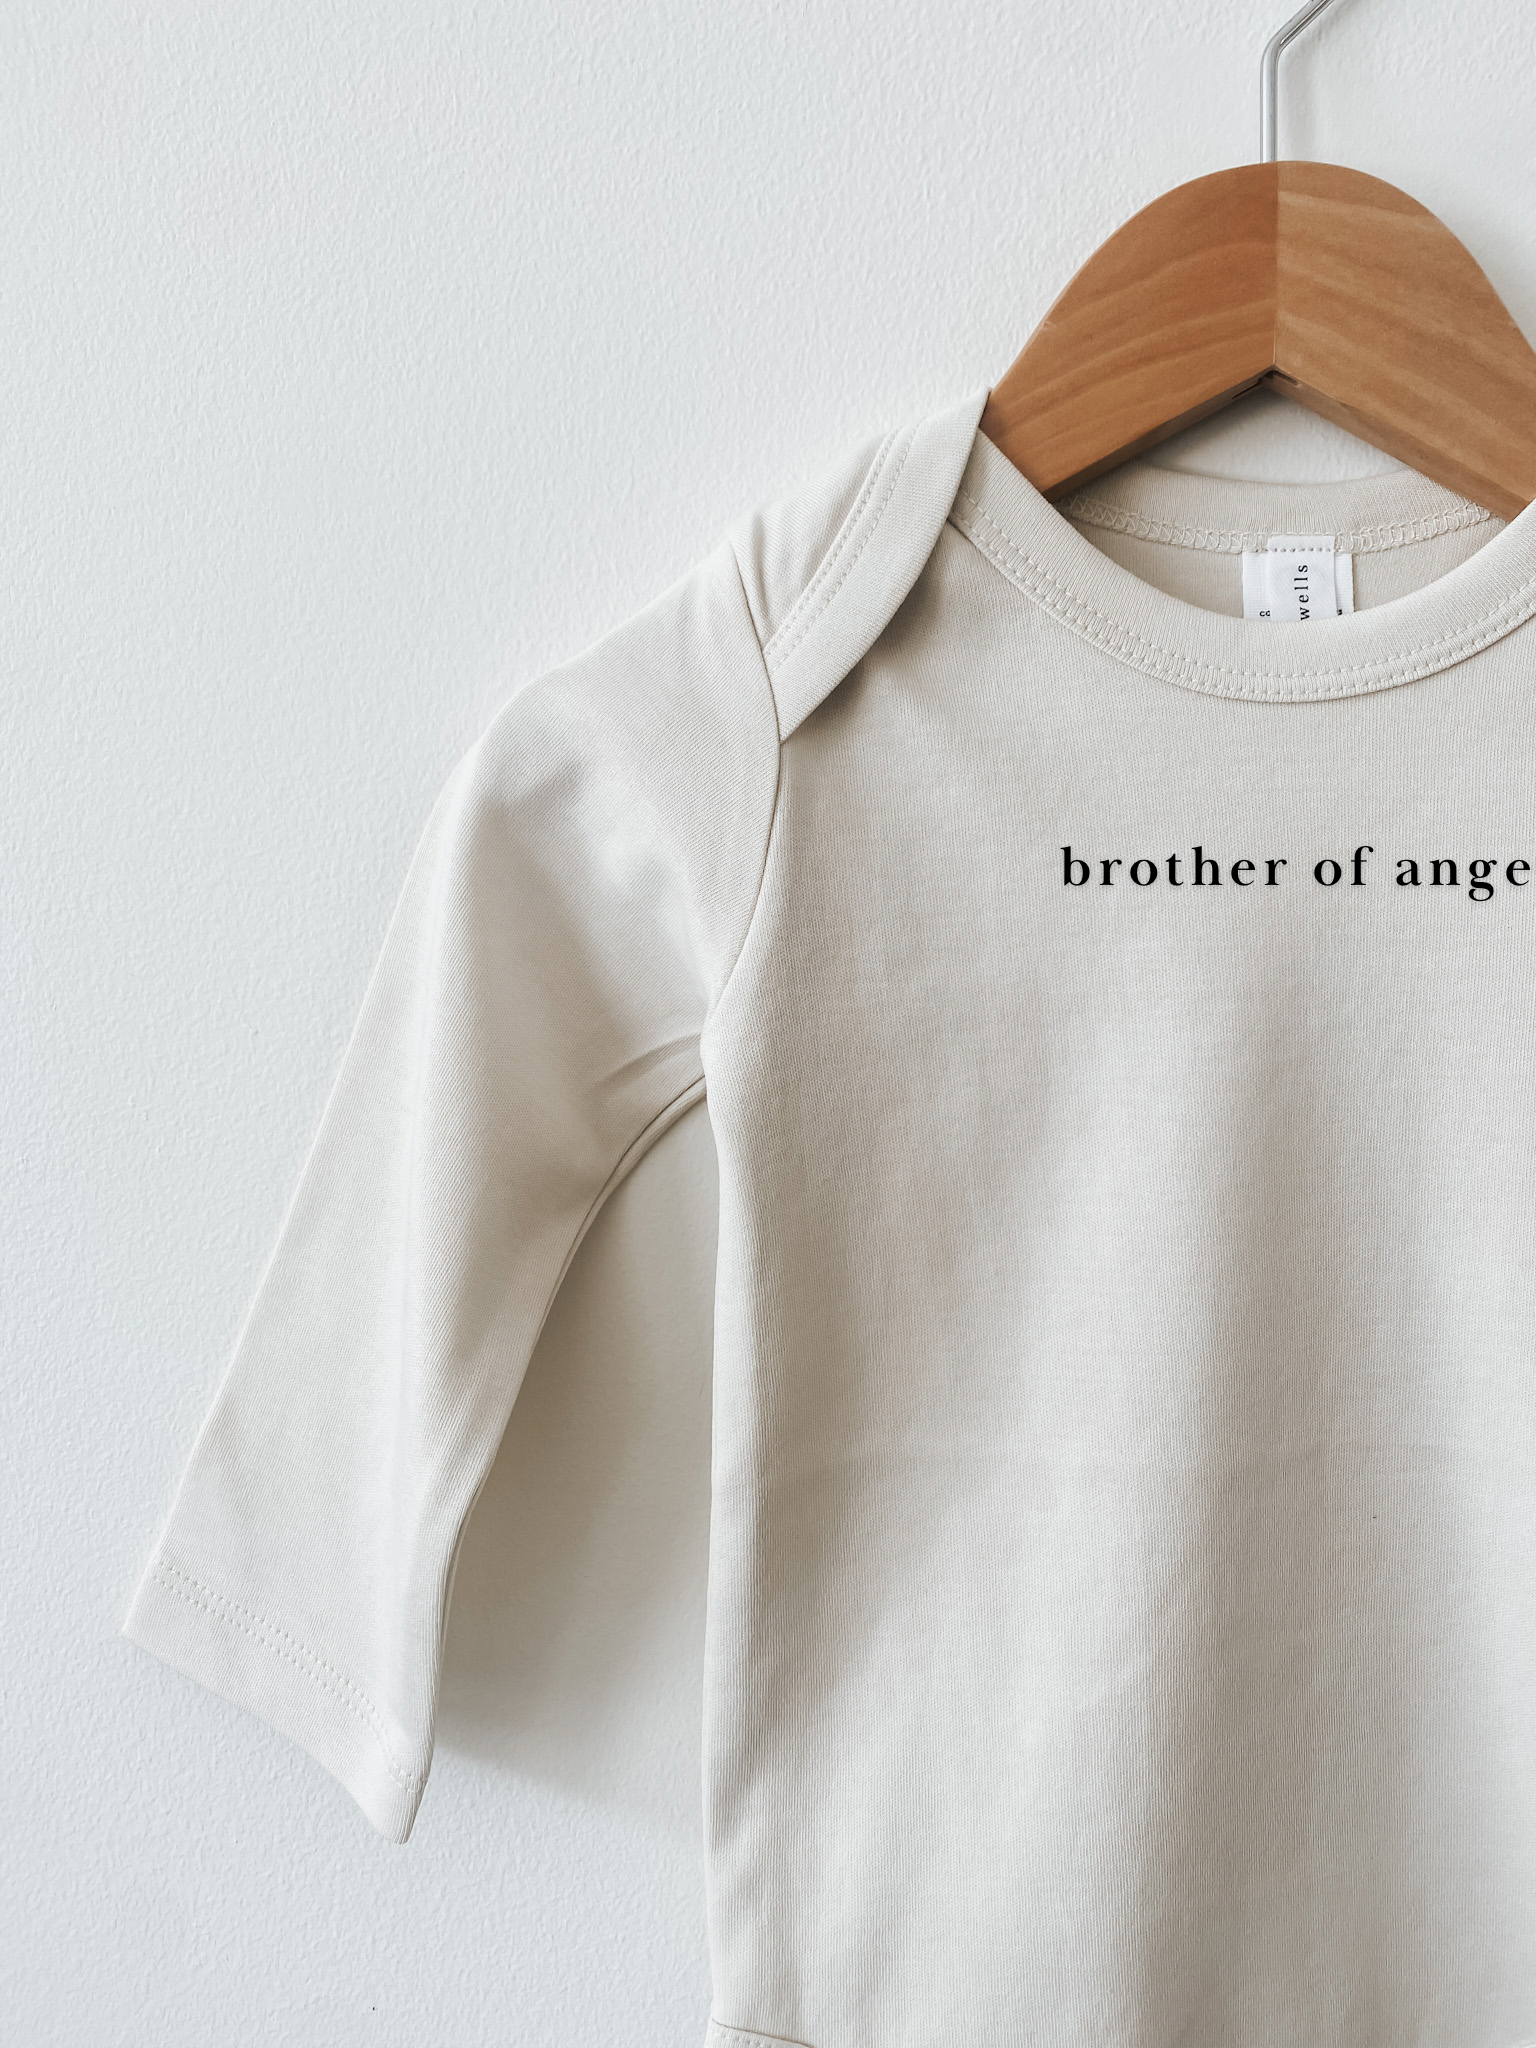 Classic Long Sleeve Bodysuit | Brother Of Angels